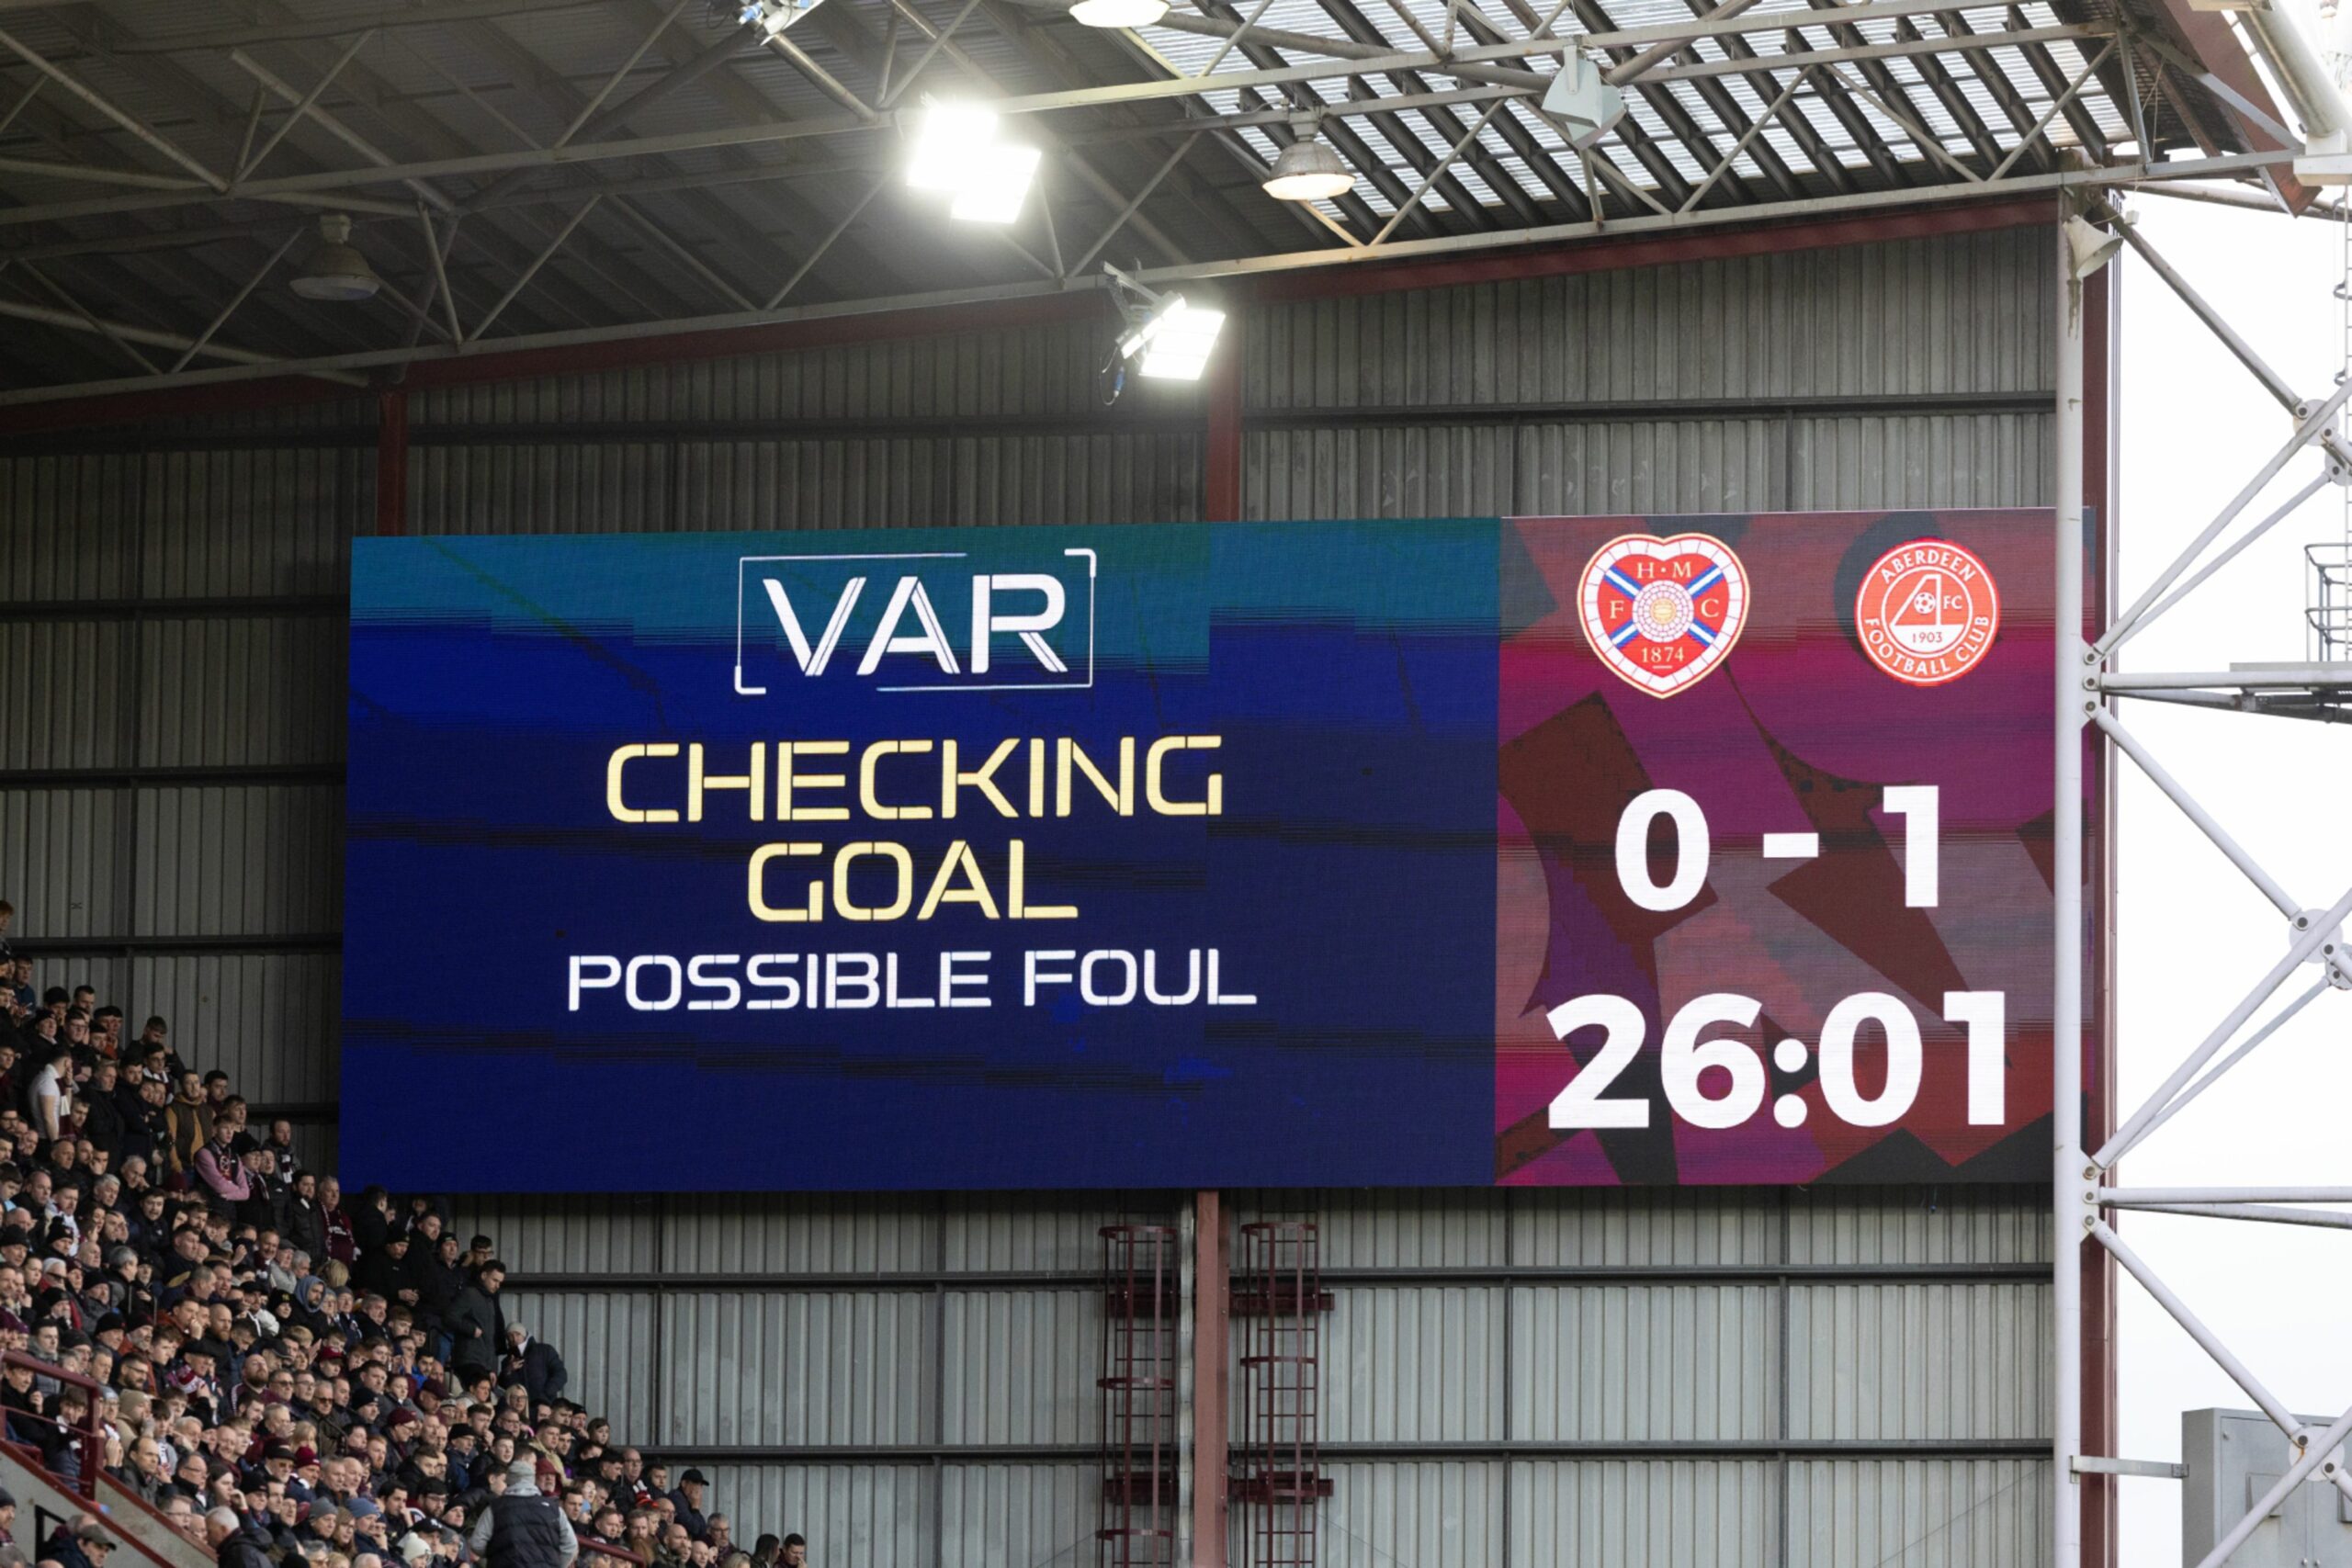  A VAR check takes place after Aberdeen's Bojan Miovski scores a disallowed goal against Hearts. Image: SNS 